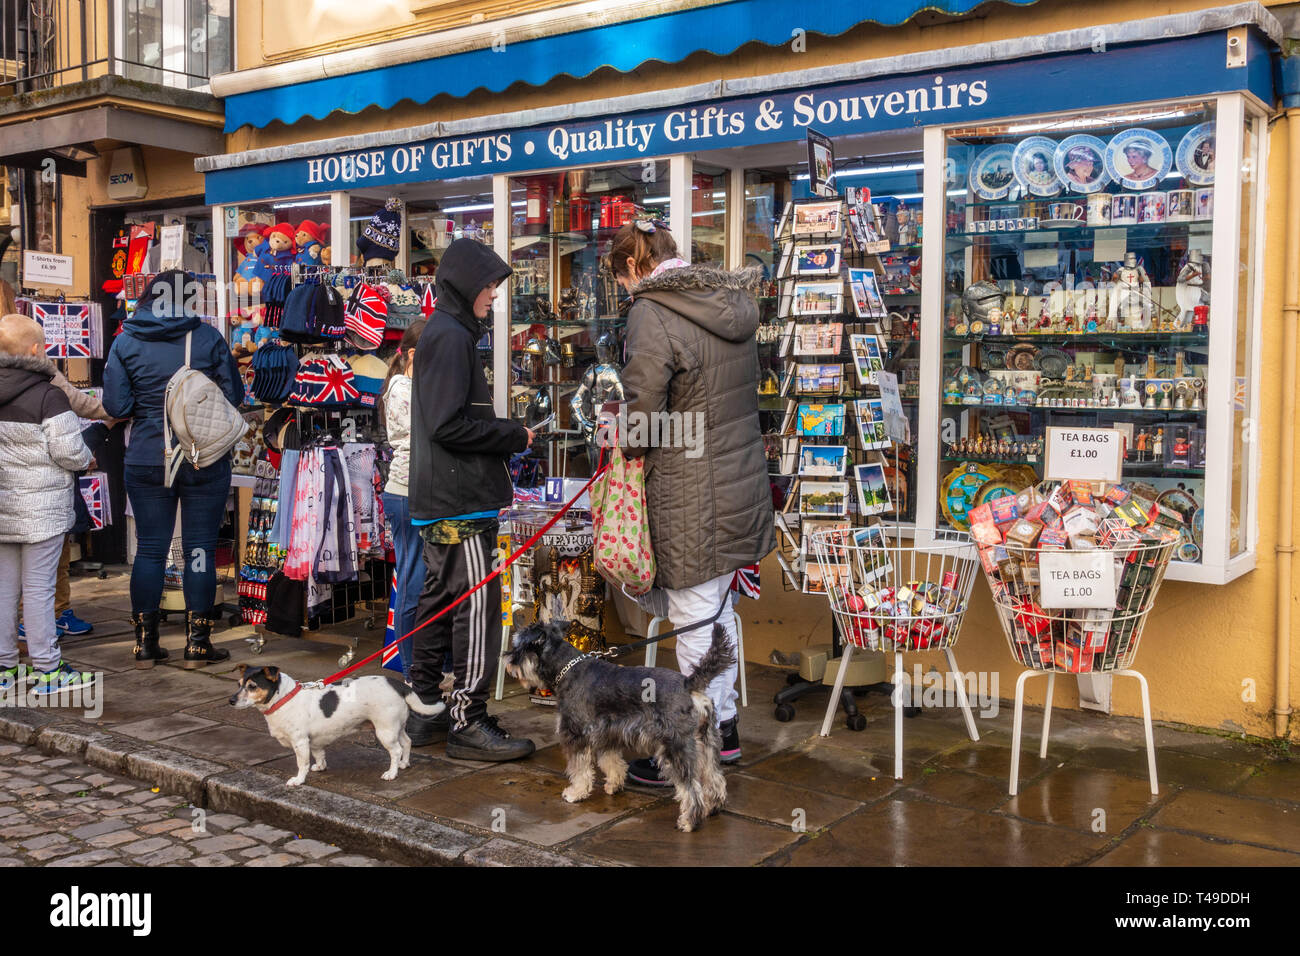 Tourists browse gifts at a souvenir shop in Church Street, Windsor, UK Stock Photo